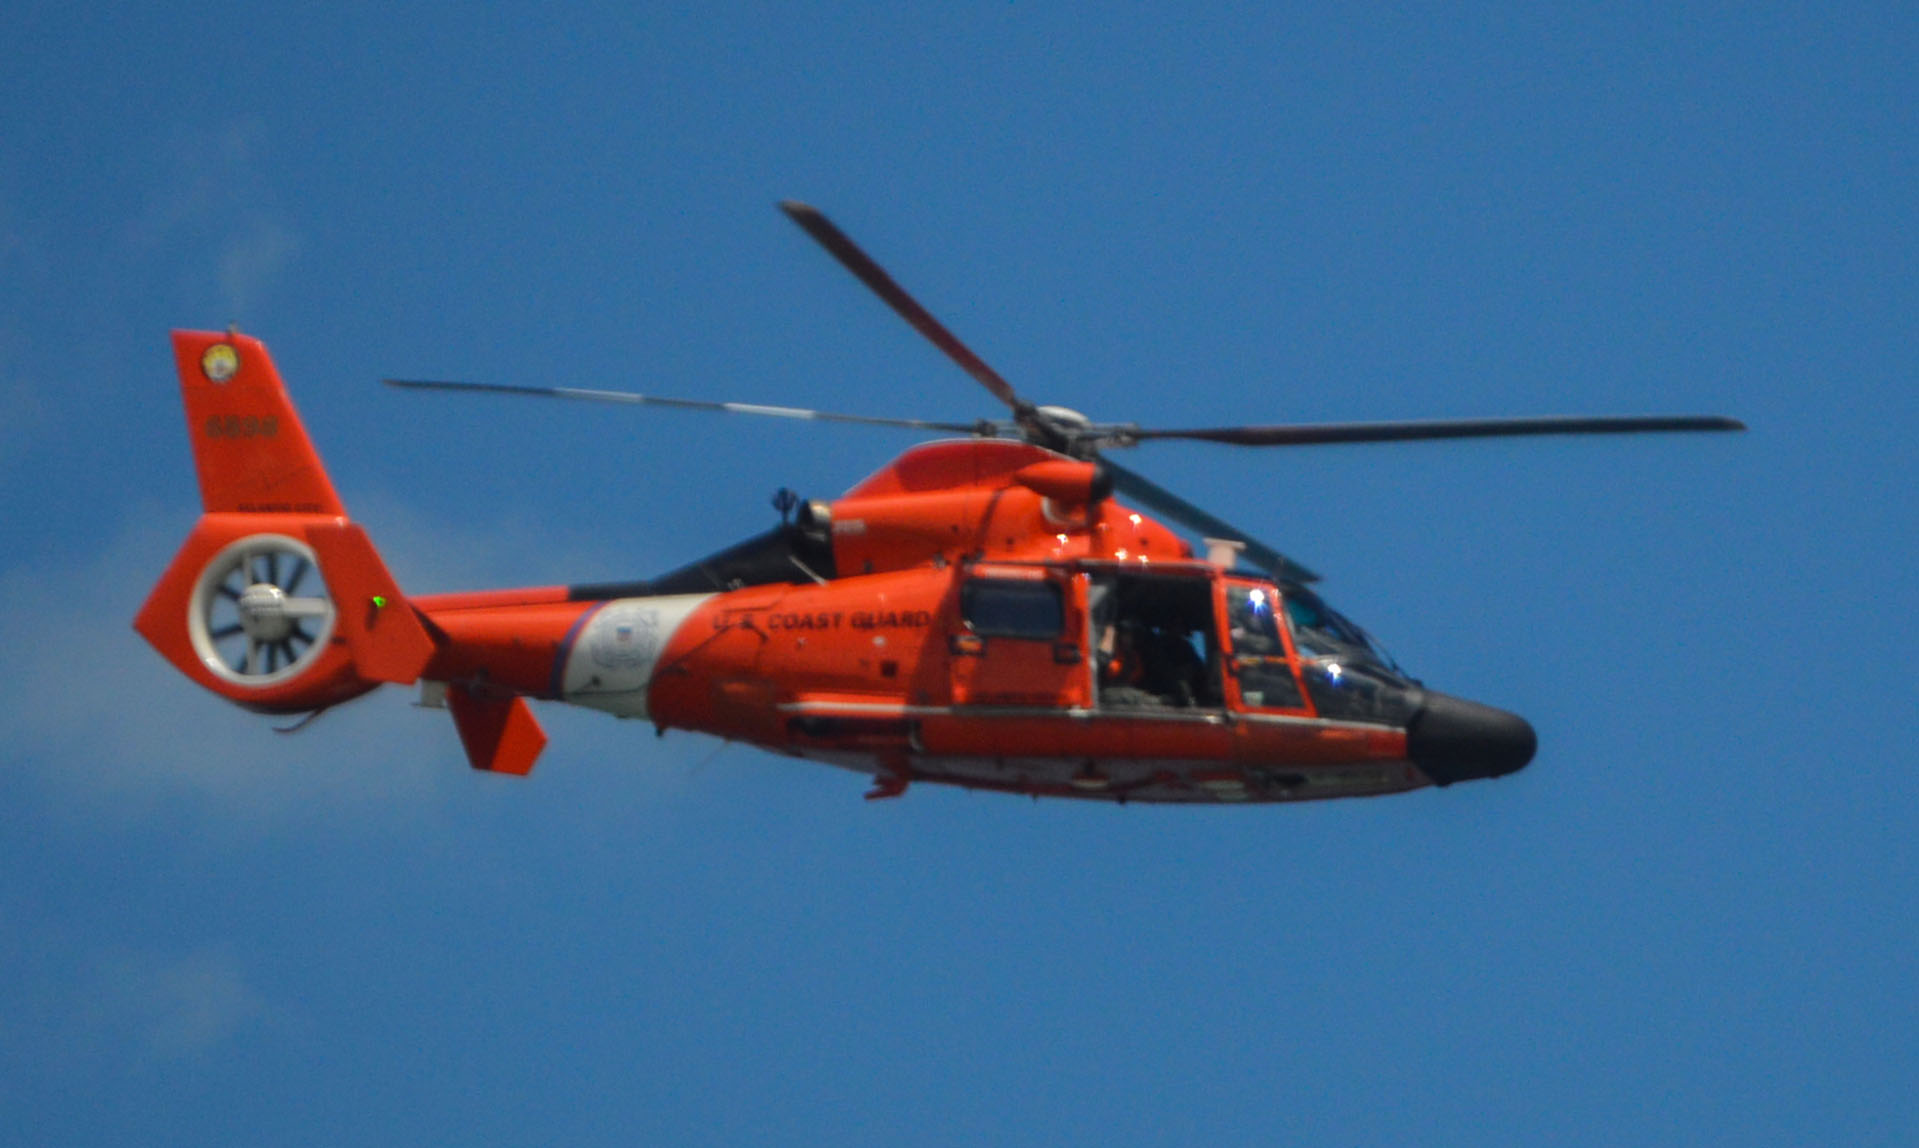 MH-65 Dolphin Helicopter from U.S. Coast Guard Air Station Atlantic City (Photo: Daniel Nee)